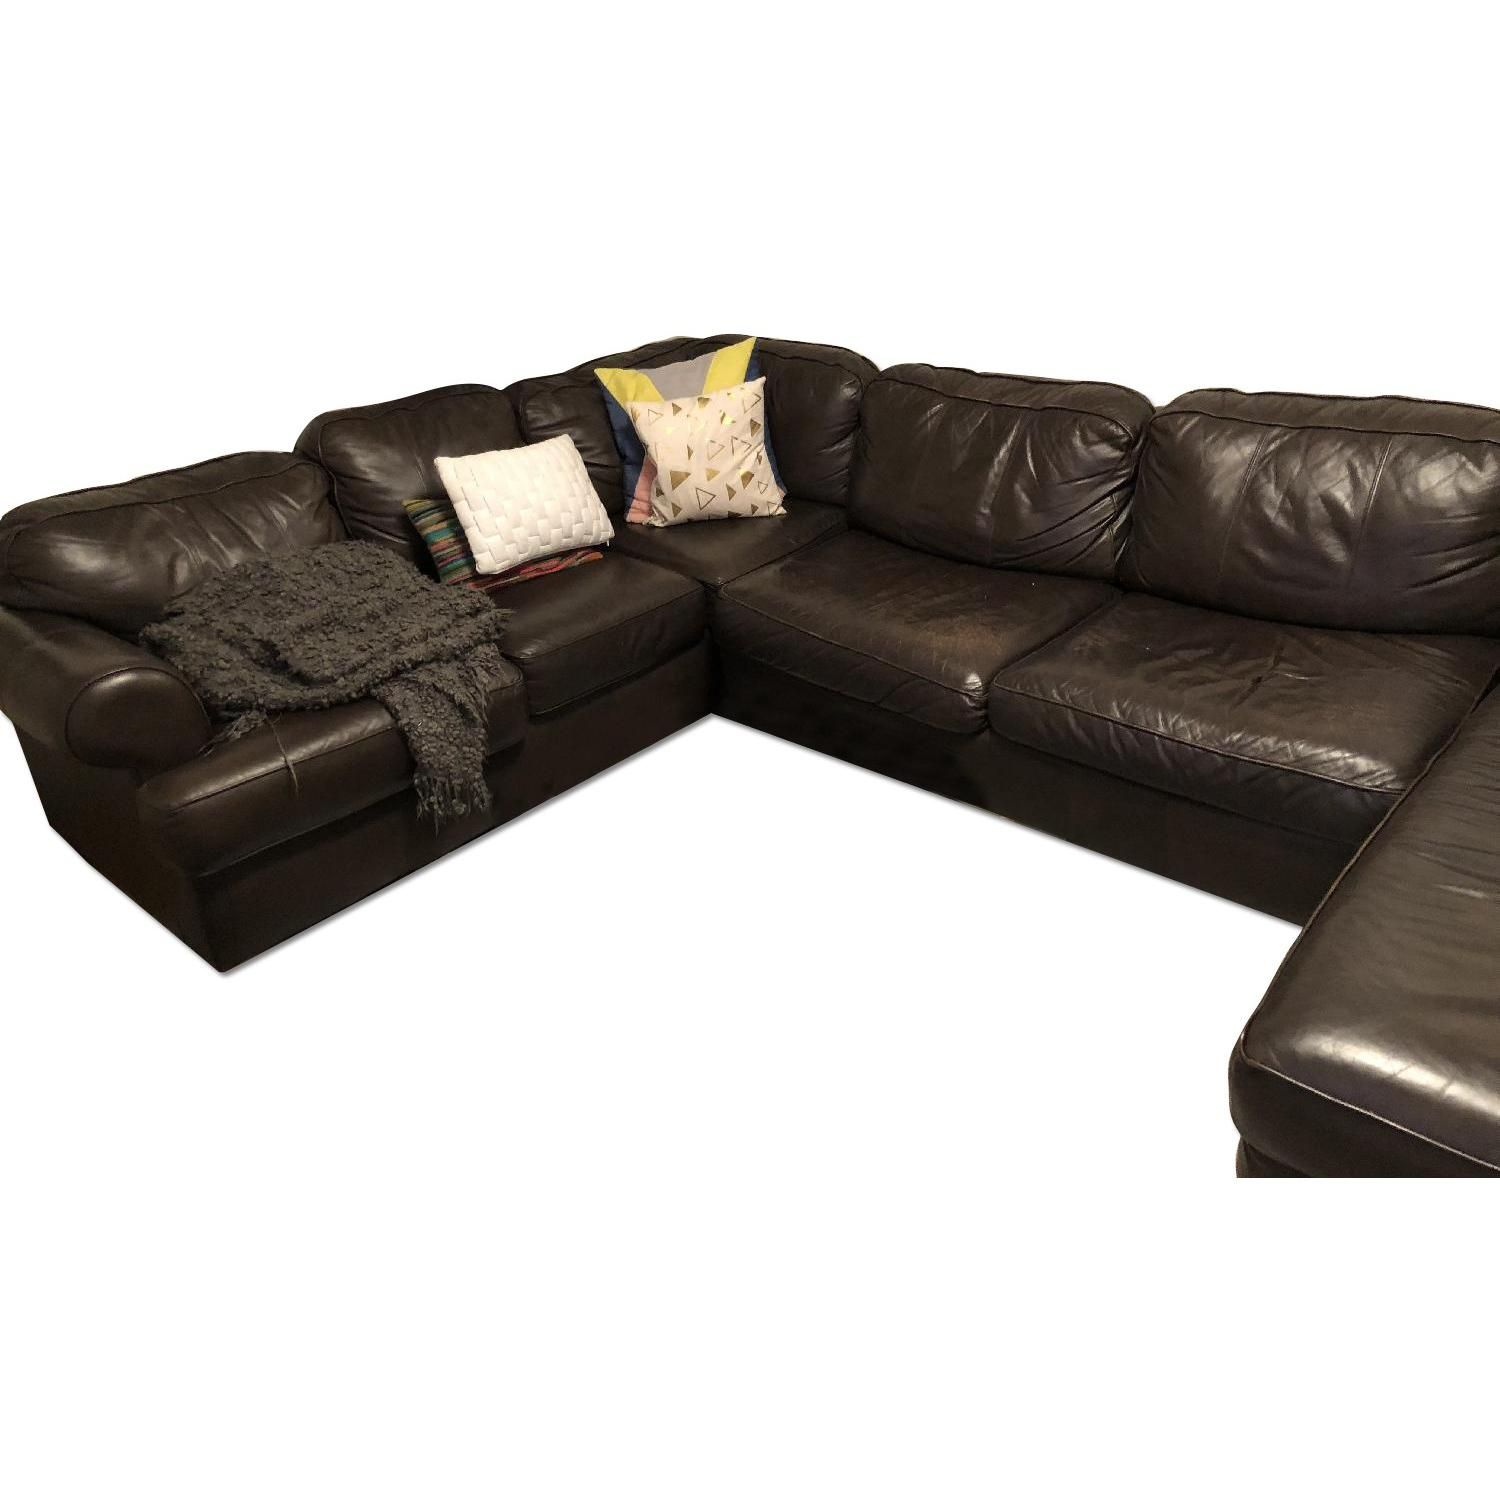 Jennifer Convertibles Leather 3 Piece Sleeper Sectional Sofa – Aptdeco Intended For 3 Seat Convertible Sectional Sofas (View 13 of 20)